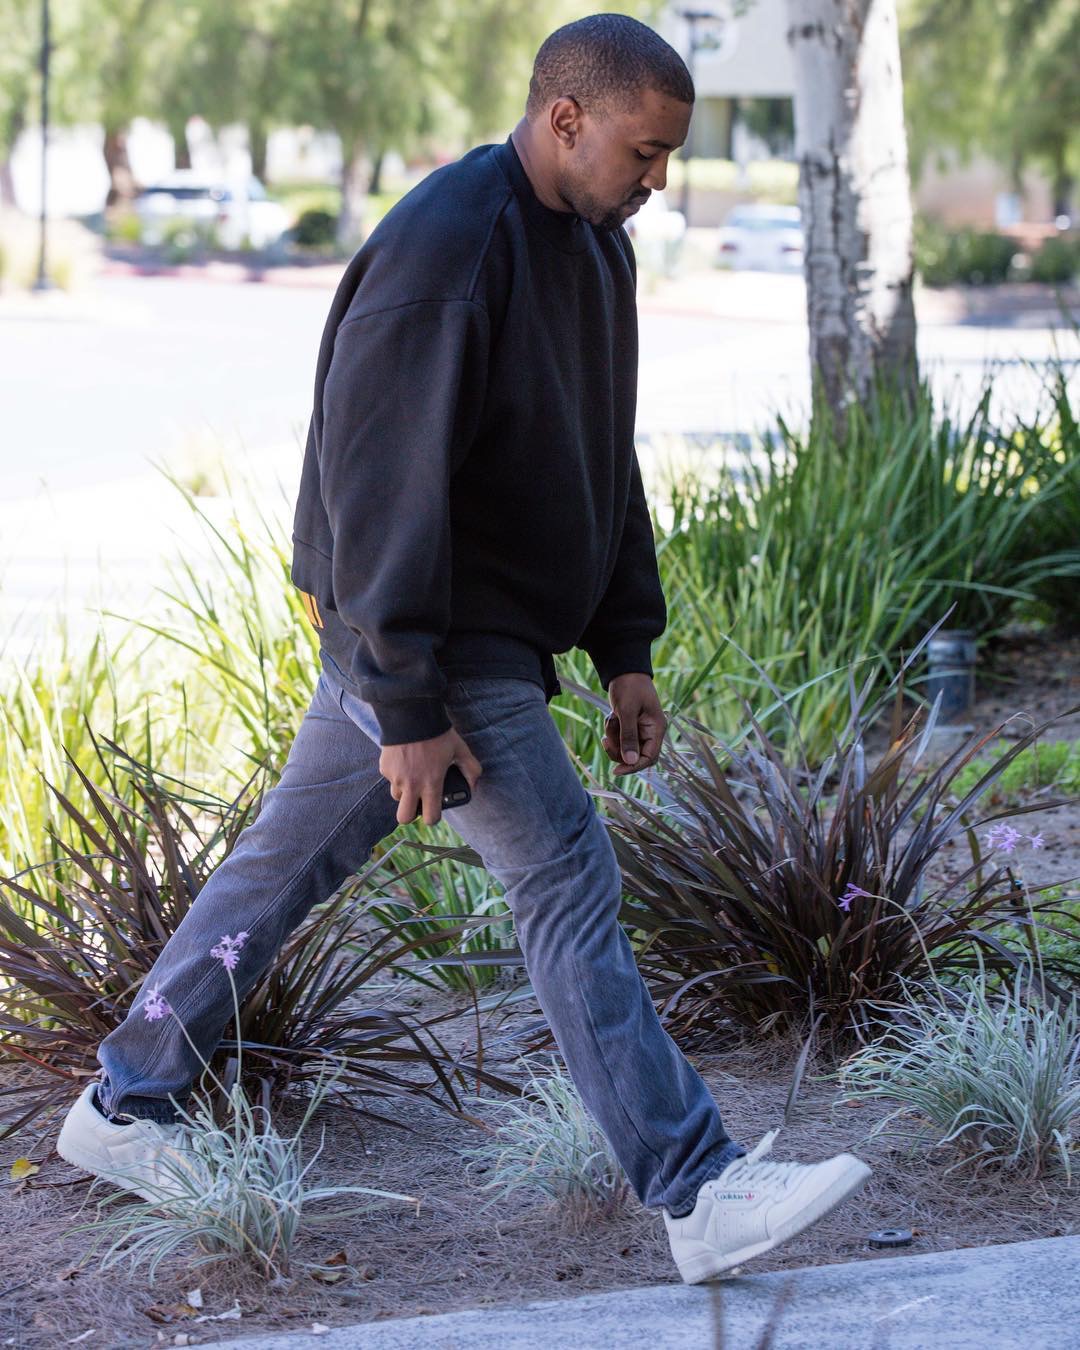 Lurk Relaxing ferry SPOTTED: Kanye West Wears Adidas Yeezy Calabasas Powerphase Sneakers –  PAUSE Online | Men's Fashion, Street Style, Fashion News & Streetwear